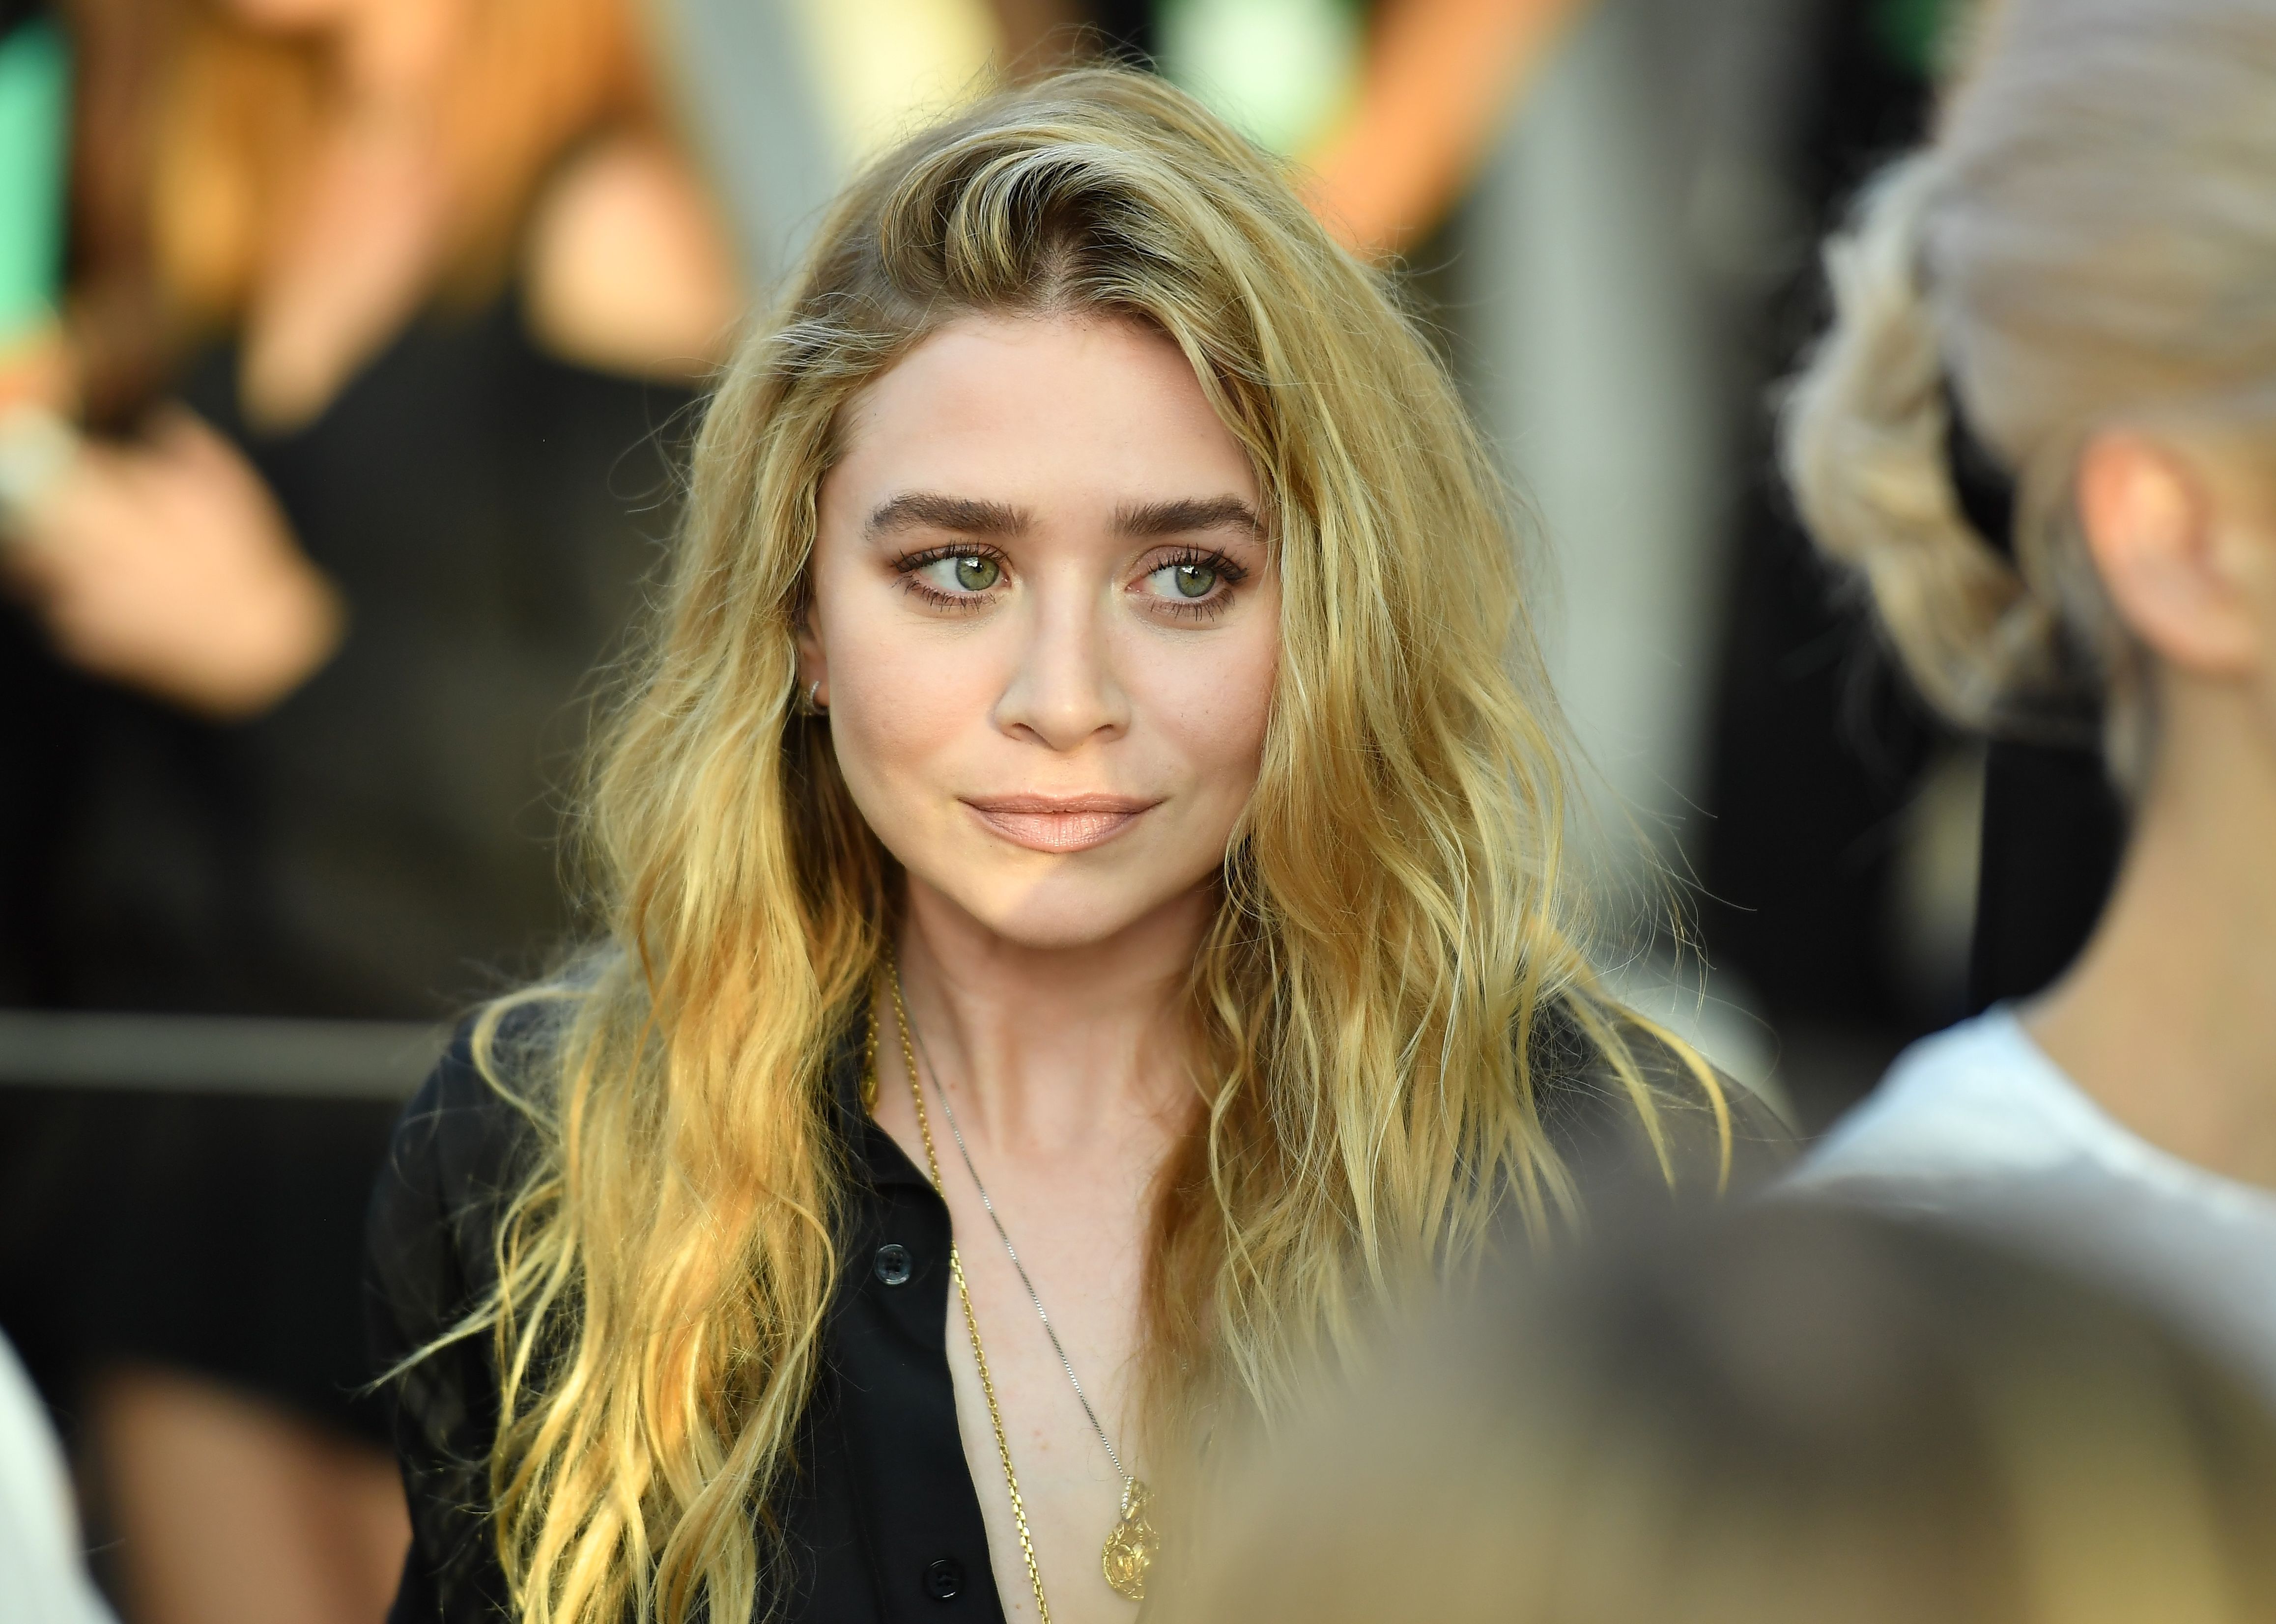 Ashley Olsen at the 2018 CFDA Fashion awards on June 4, 2018 in New York | Source: Getty Images